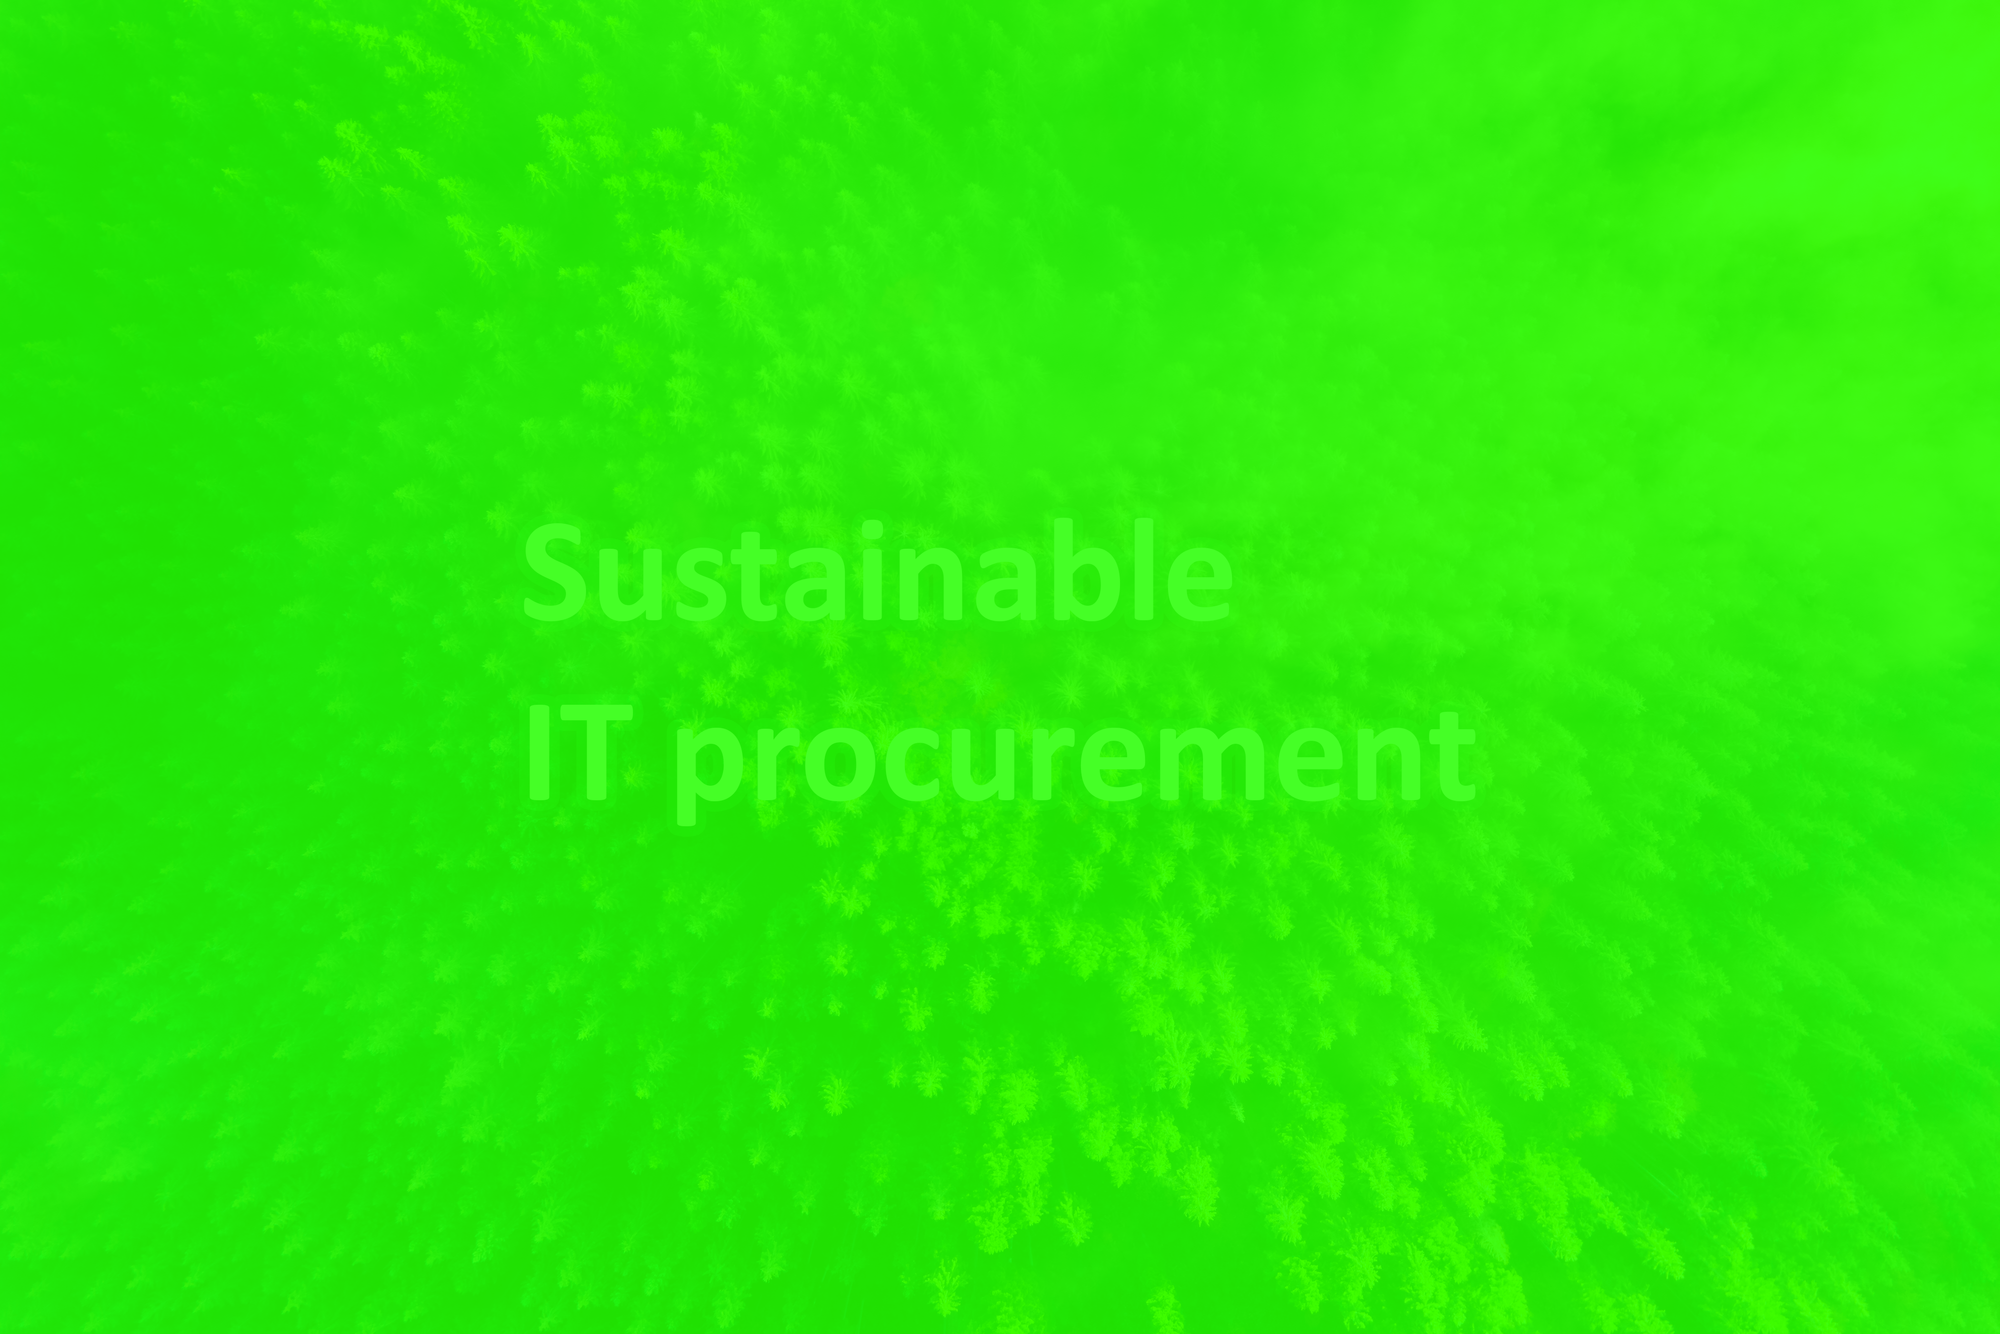 Sustainable IT procurement for High-end datacenter equipment